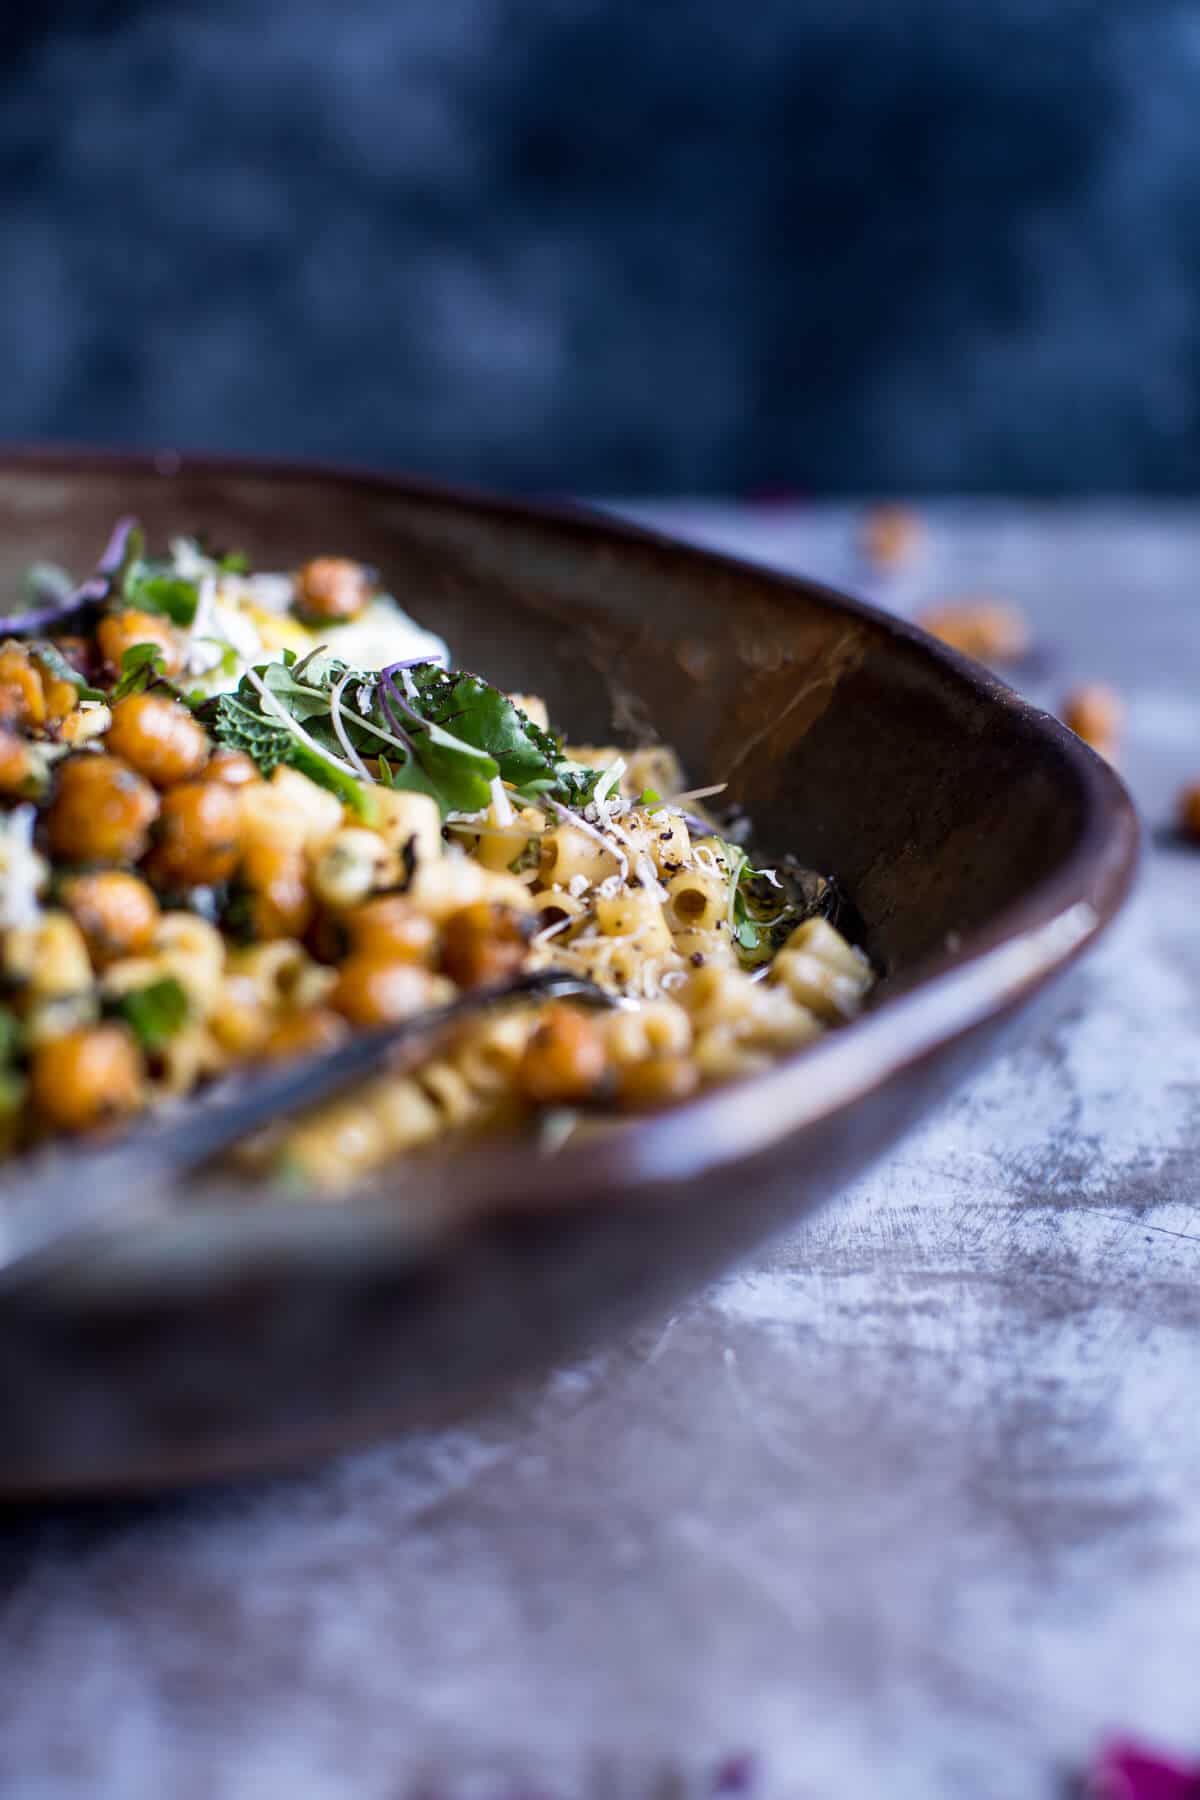 Quick + Simple Pasta “Risotto” with Herbed Roasted Chickpeas | halfbakedharvest.com @hbharvest